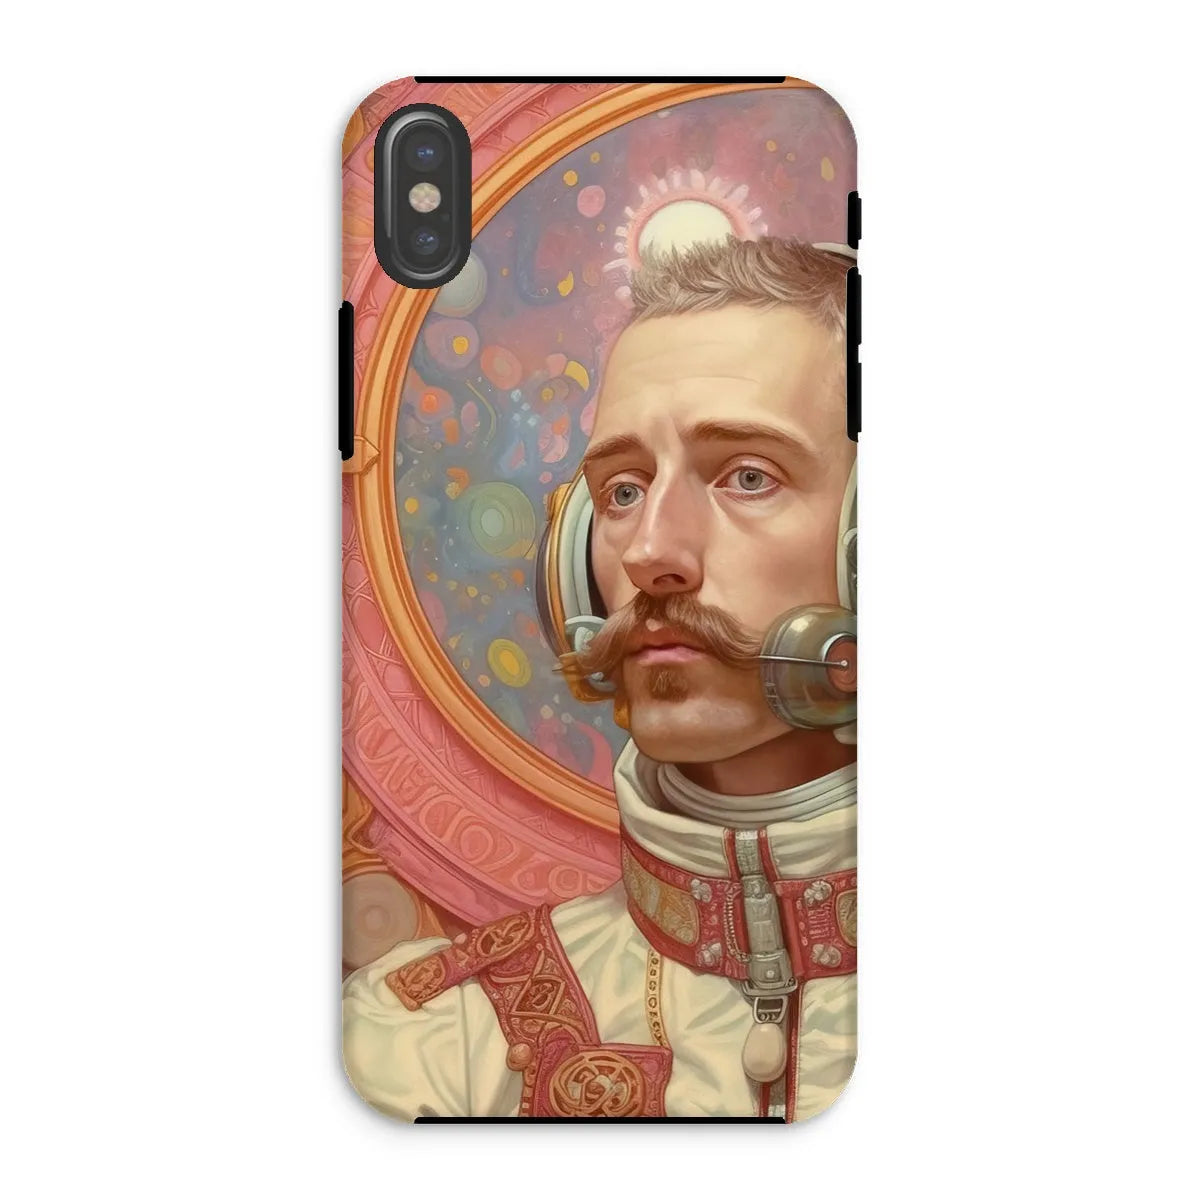 Axel The Gay Astronaut - Gay Aesthetic Art Phone Case - Iphone Xs / Matte - Mobile Phone Cases - Aesthetic Art